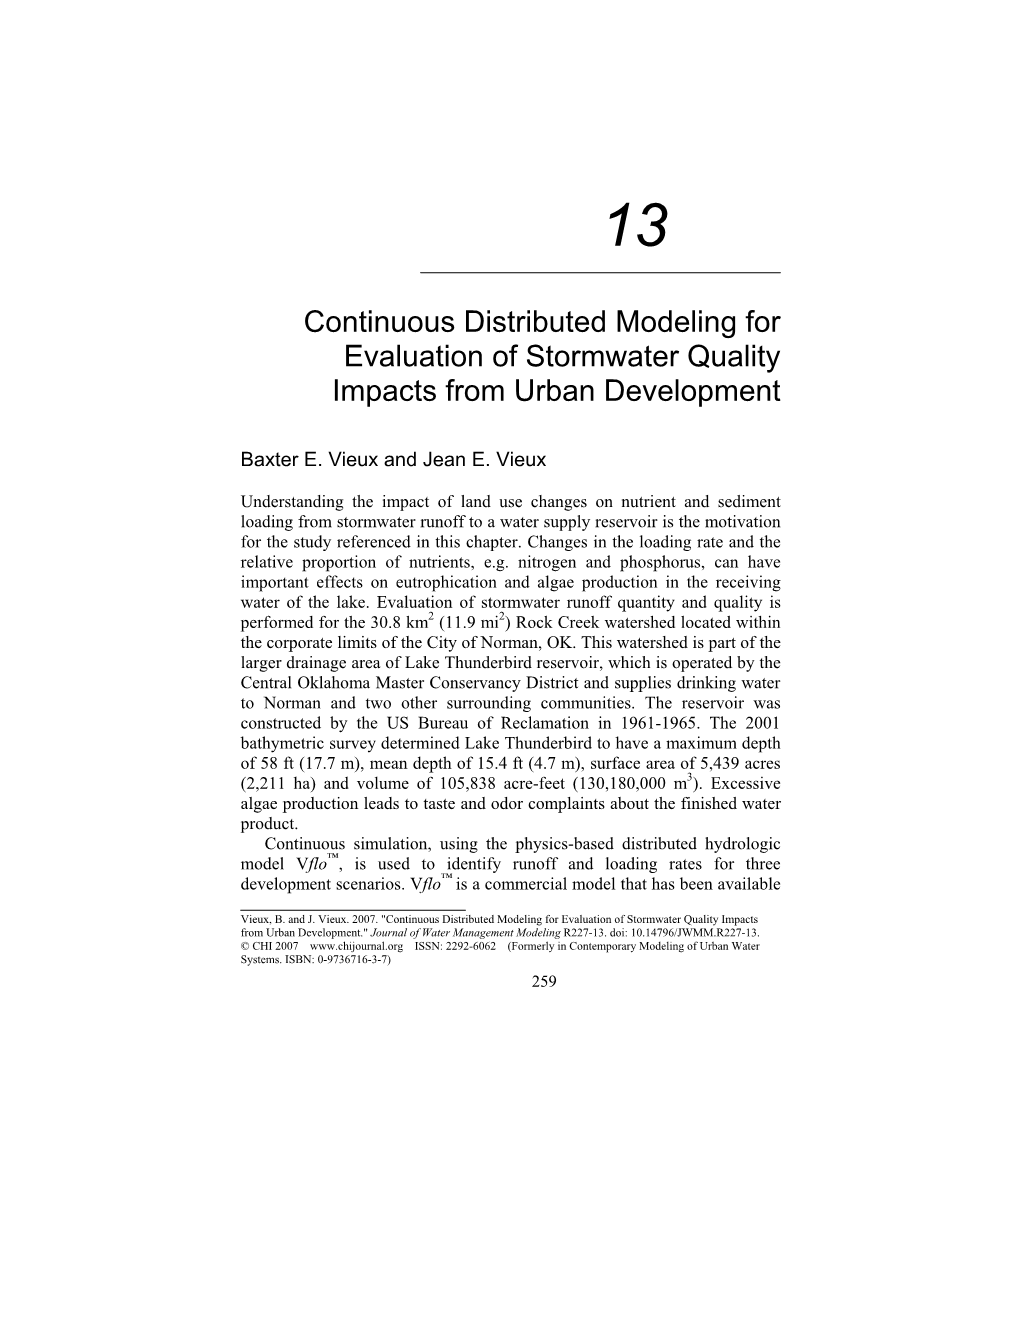 Continuous Distributed Modeling for Evaluation of Stormwater Quality Impacts from Urban Development